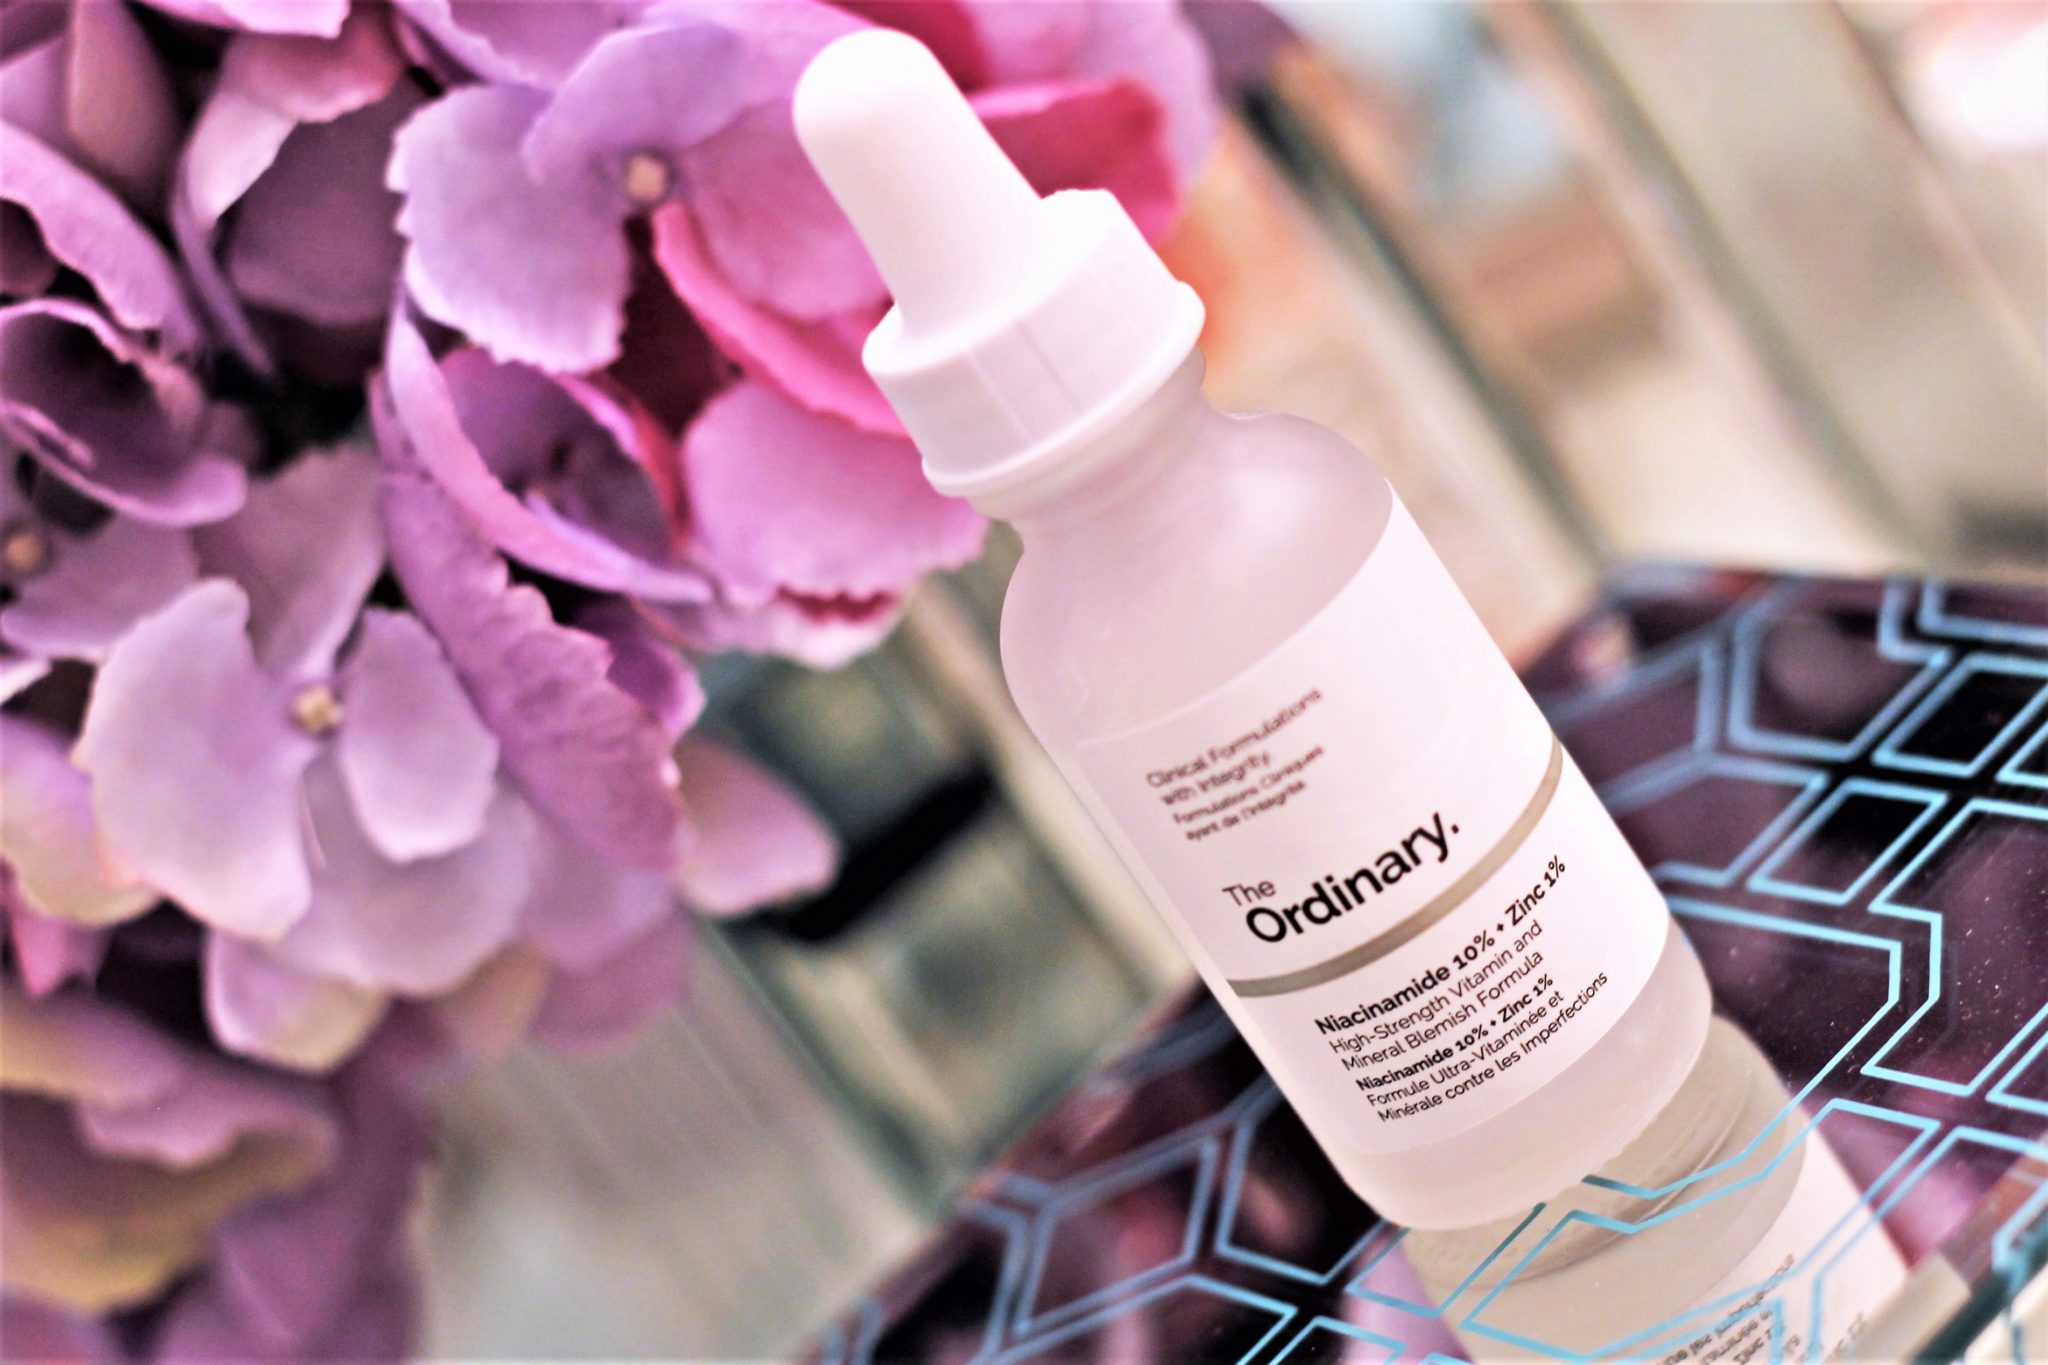 The Ordinary Niacinamide: Your Acne-Fighting Ally